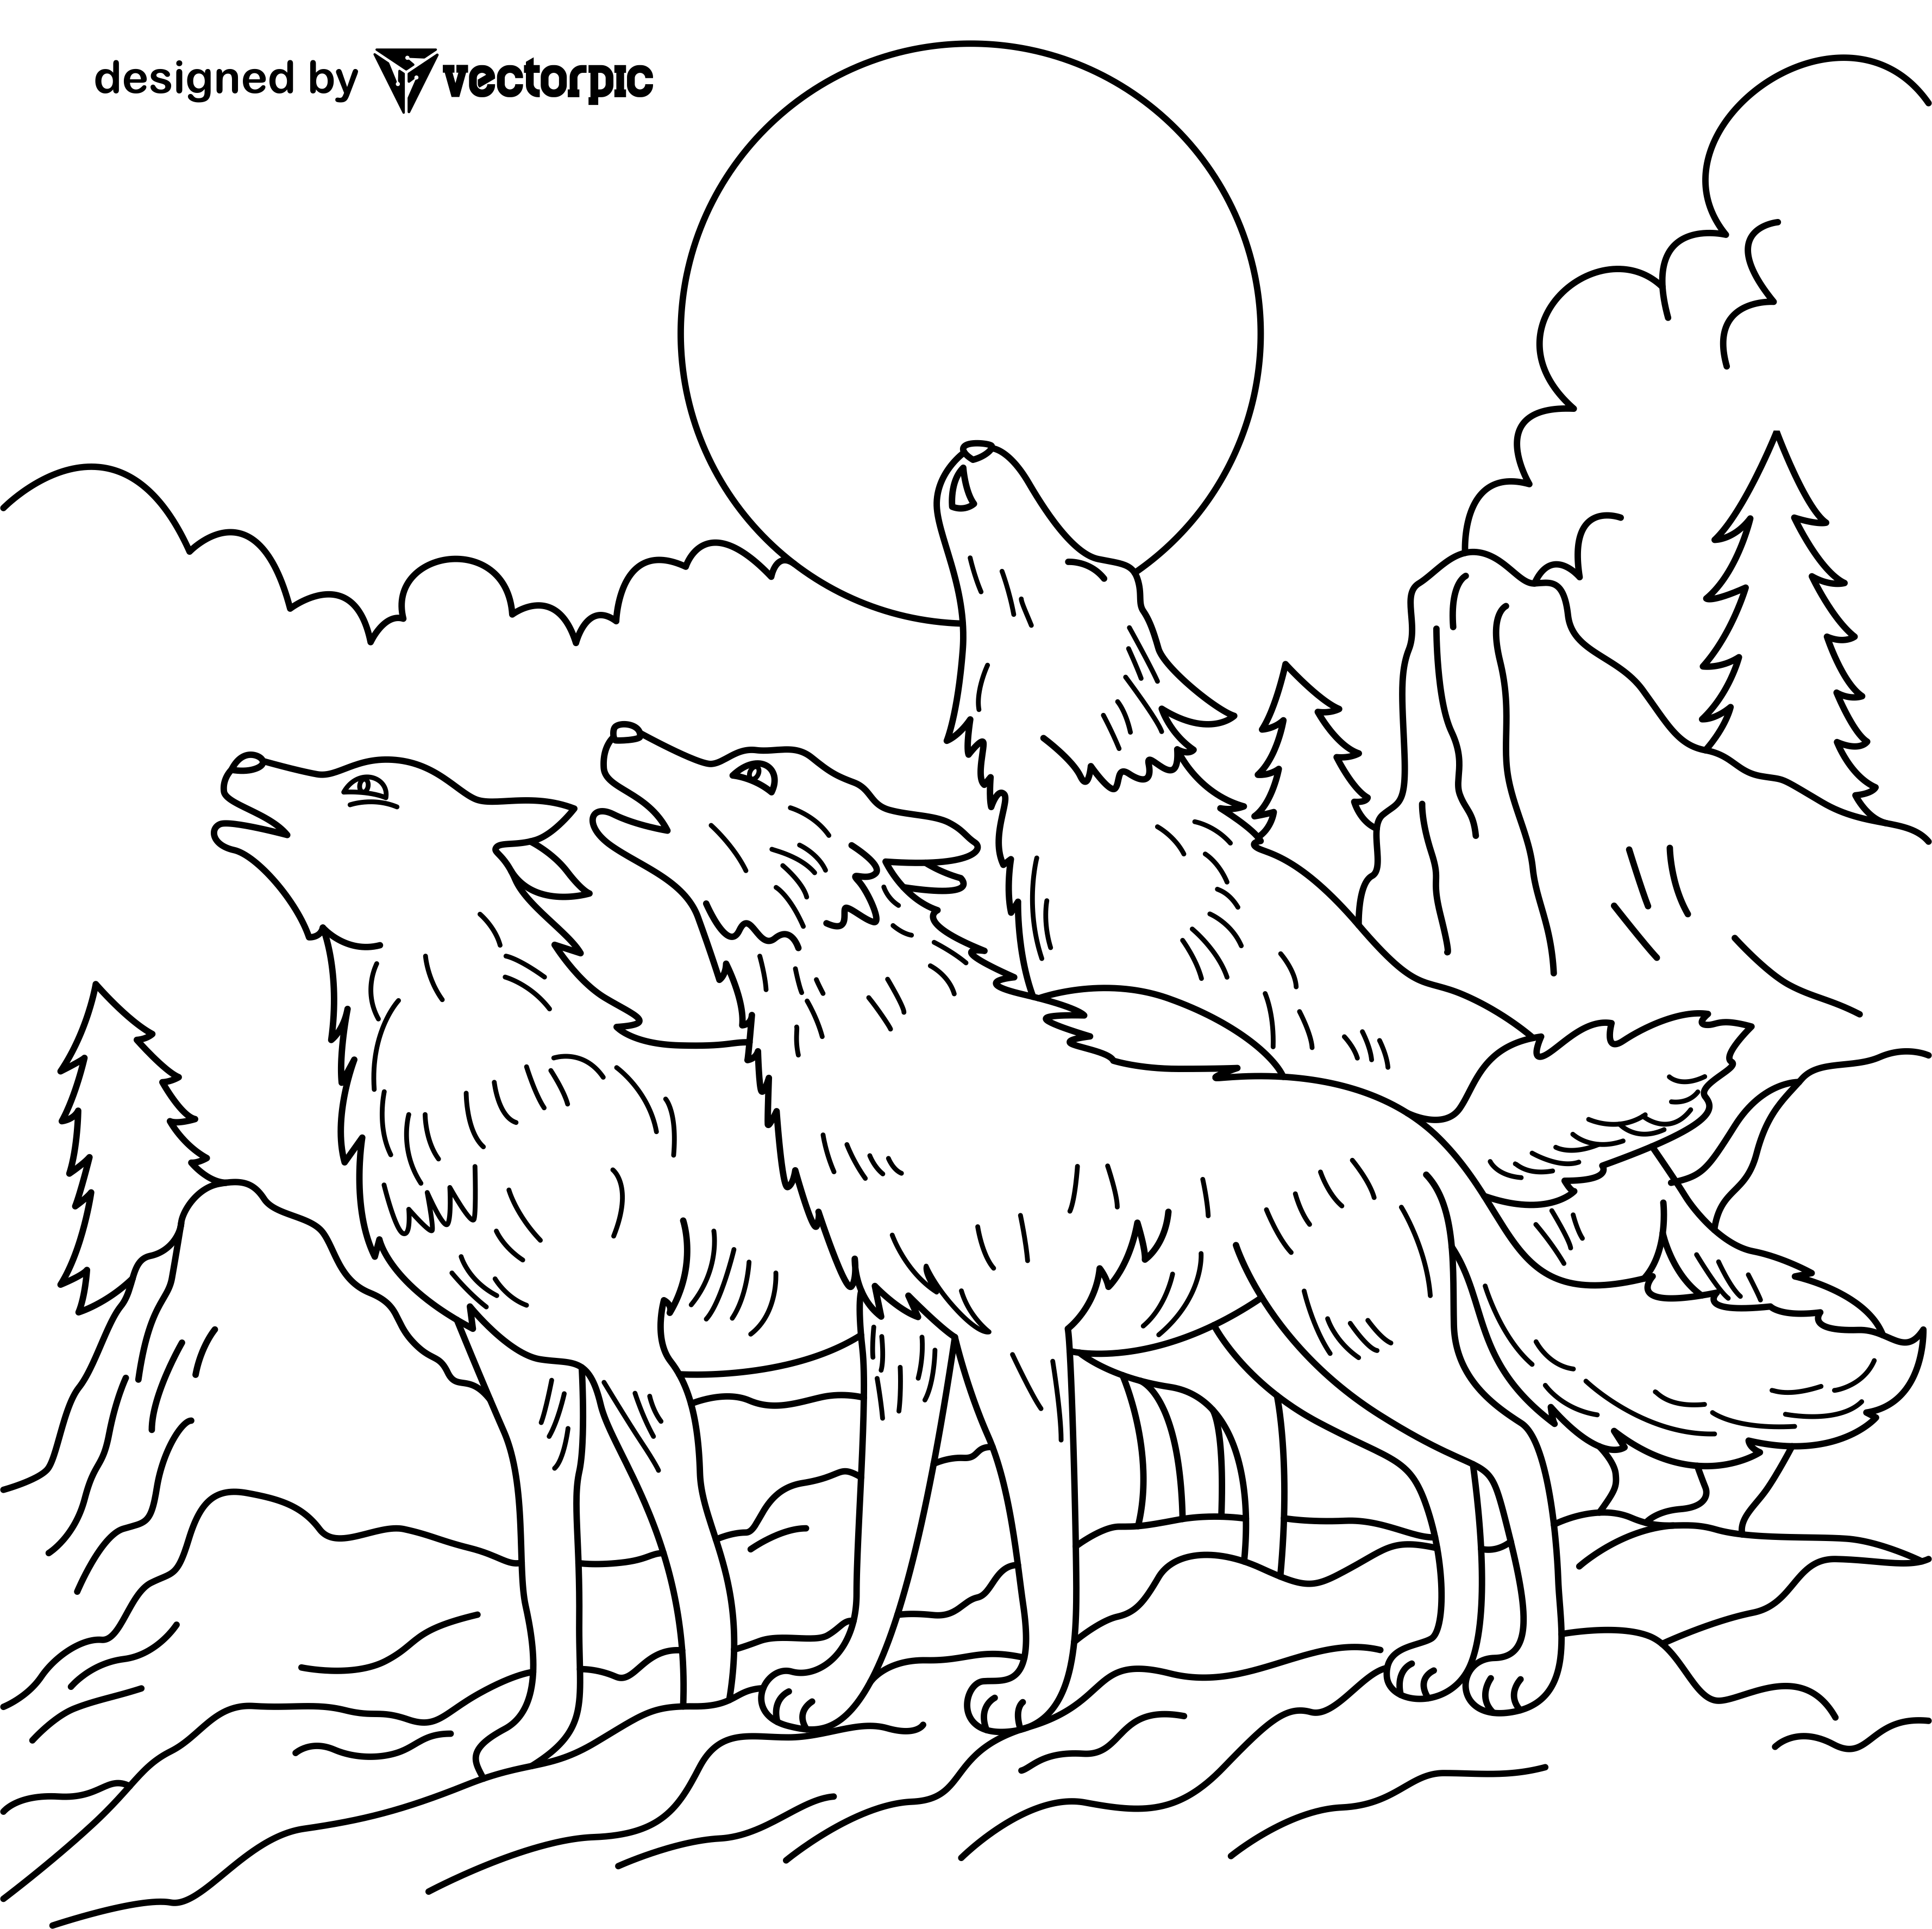 Wolf howling animal coloring pages for kids adults design free vector